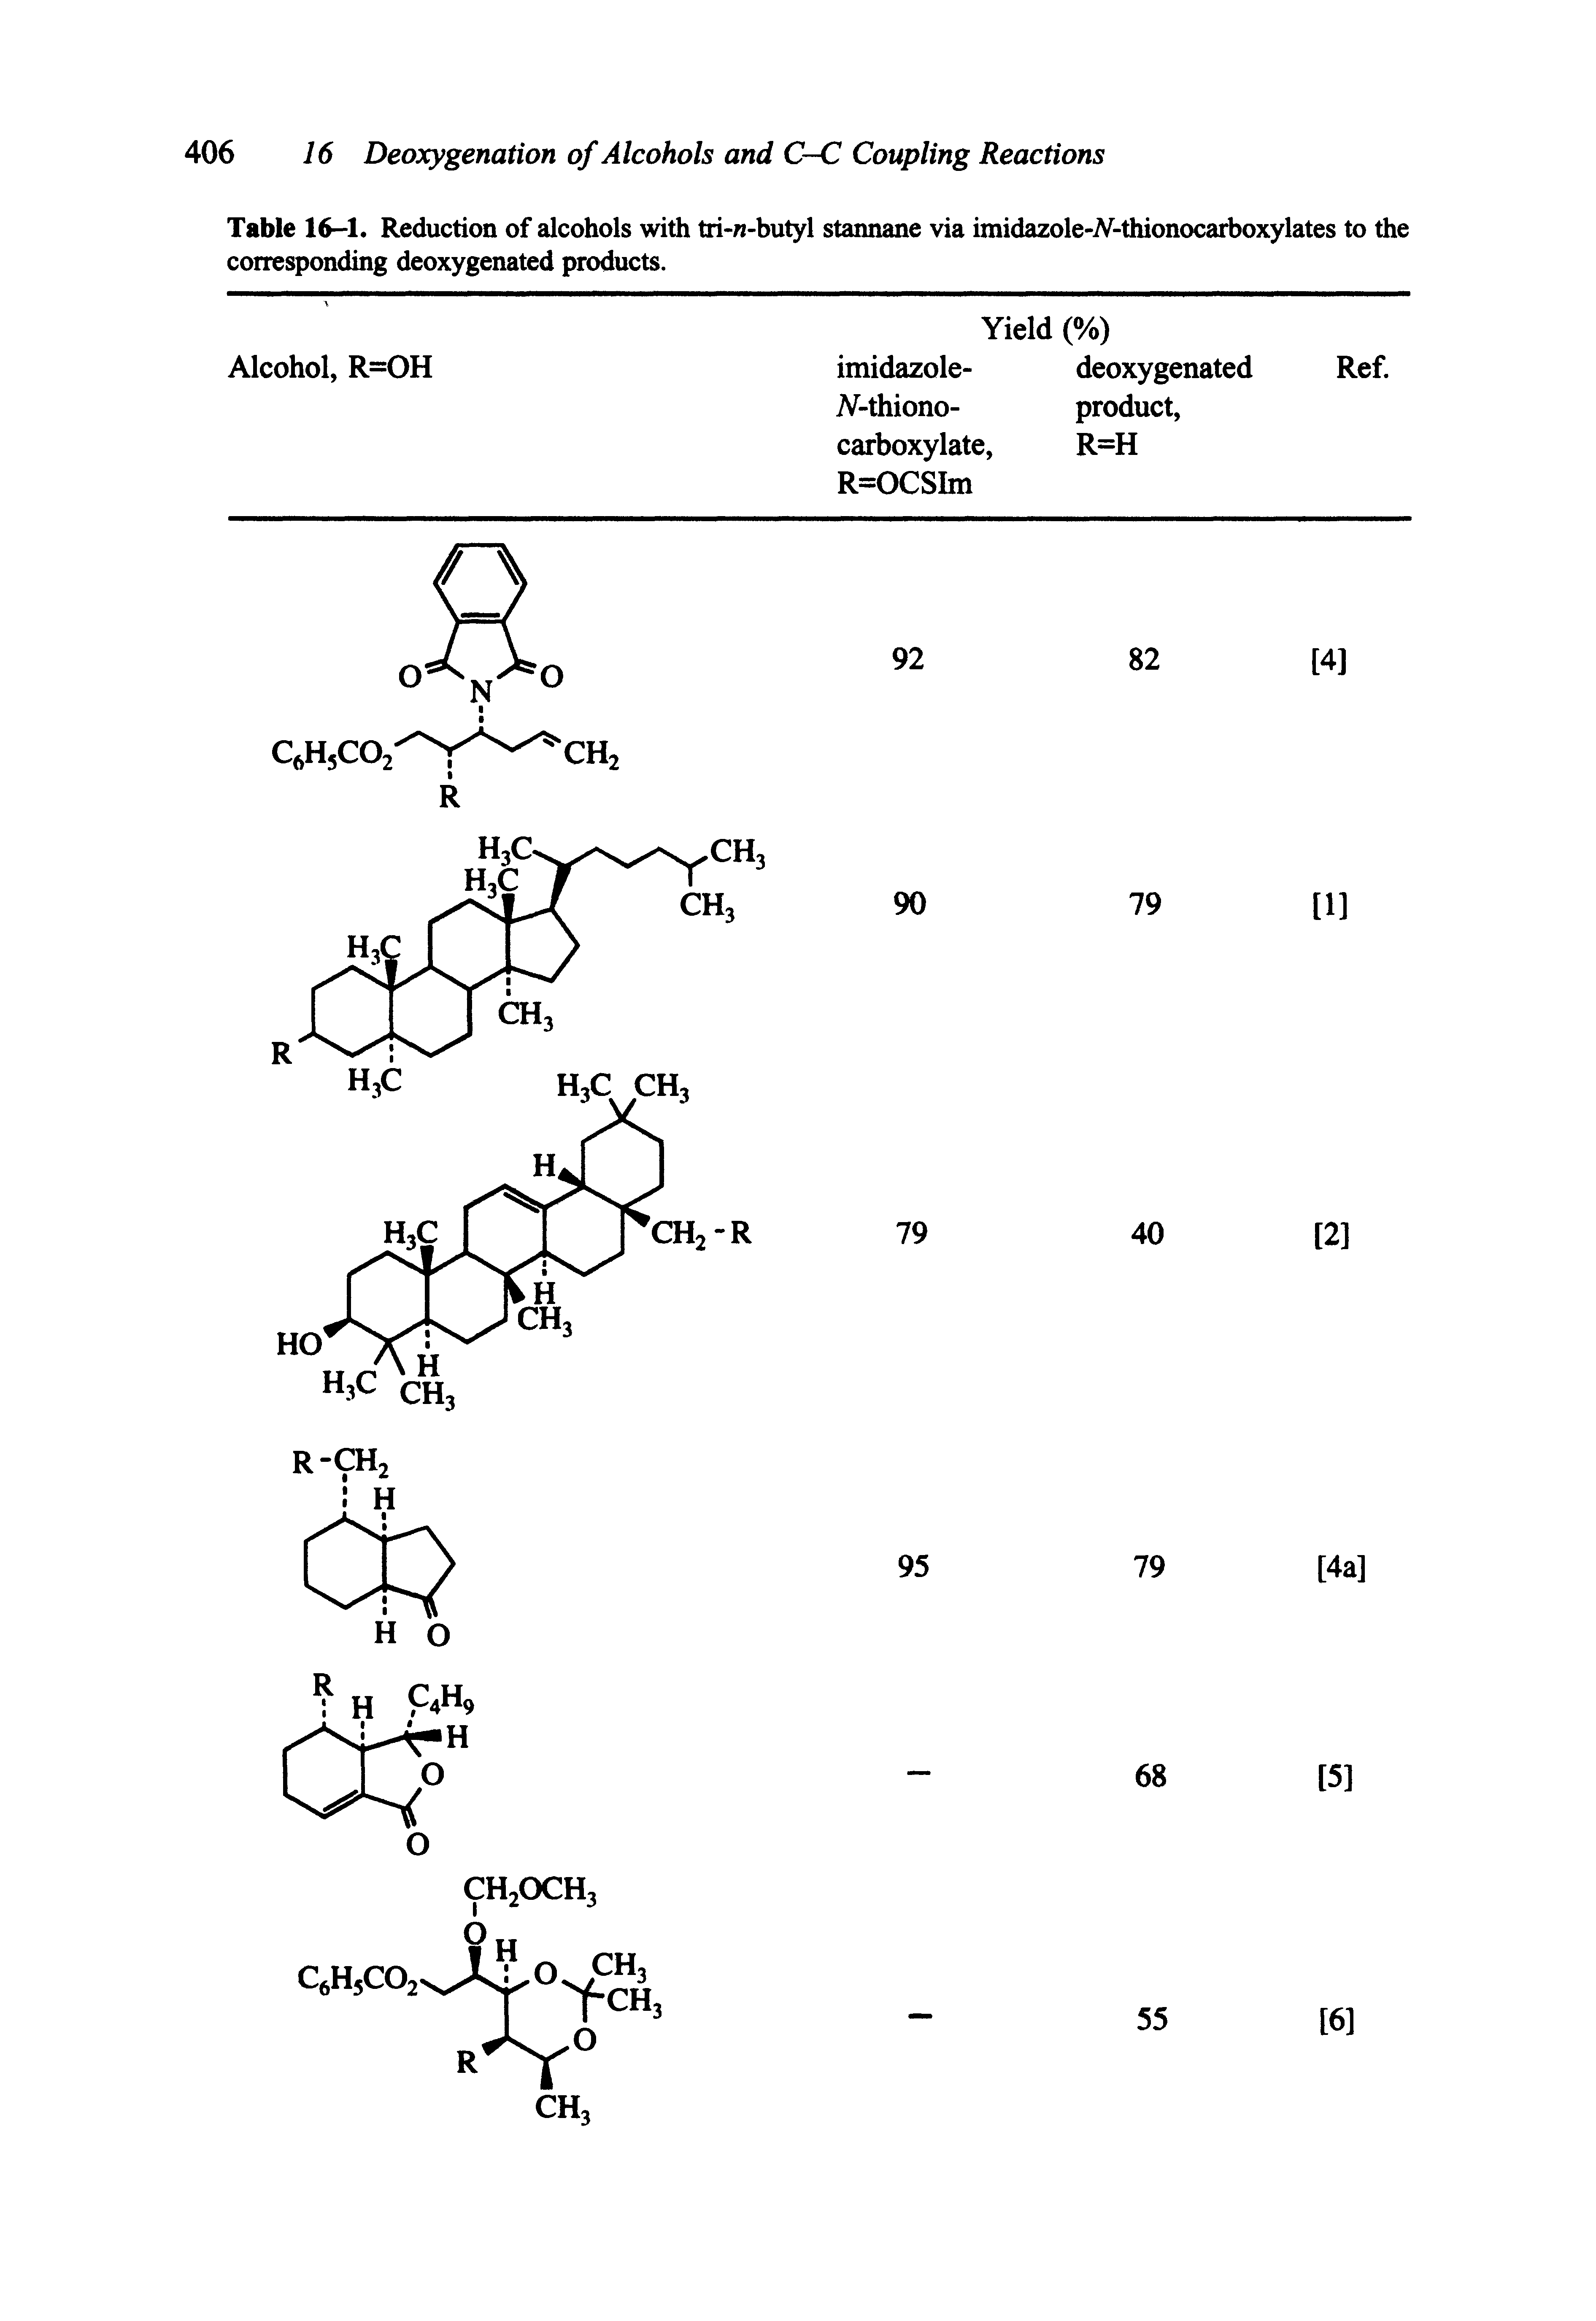 Table 16-1. Reduction of alcohols with tri- -butyl stannane via imidazole-Y-thionocarboxylates to the corresponding deoxygenated products.